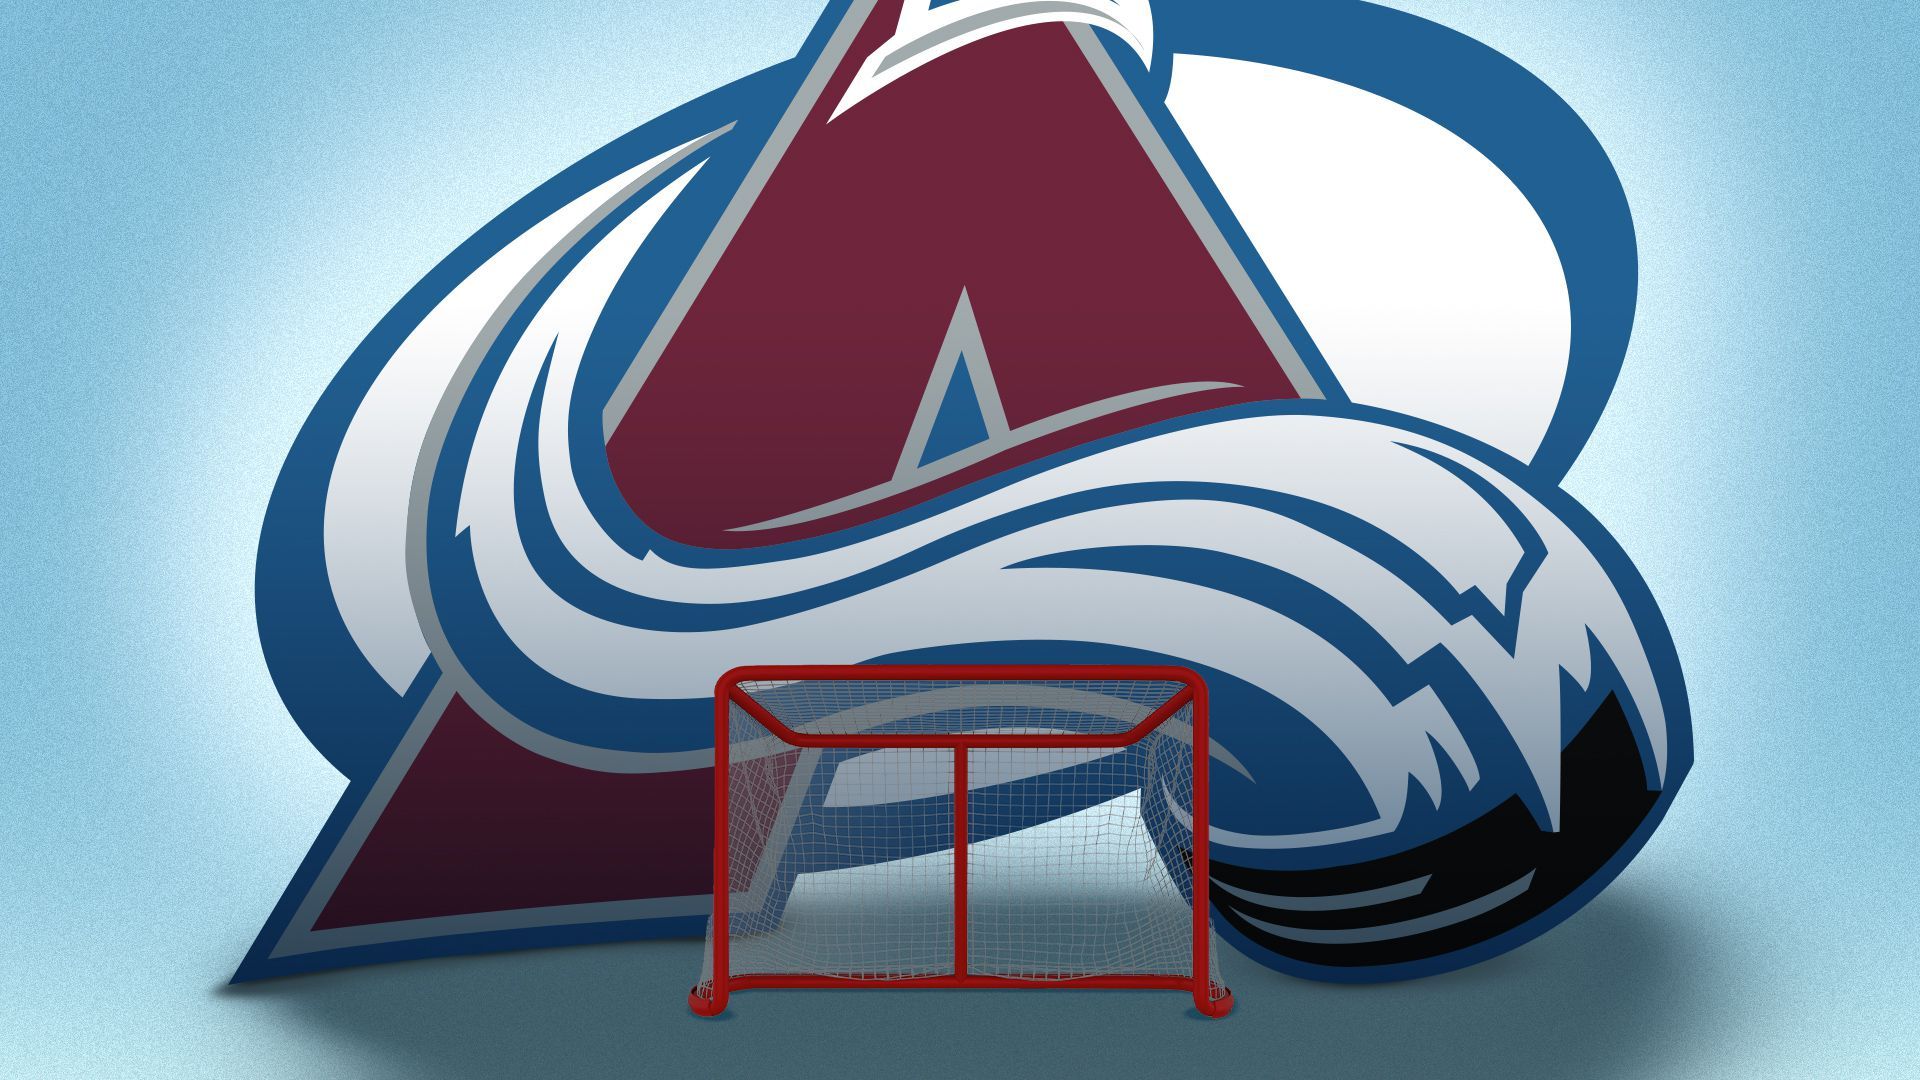 Illustration of the Avalanche logo casting a shadow over a hockey goal